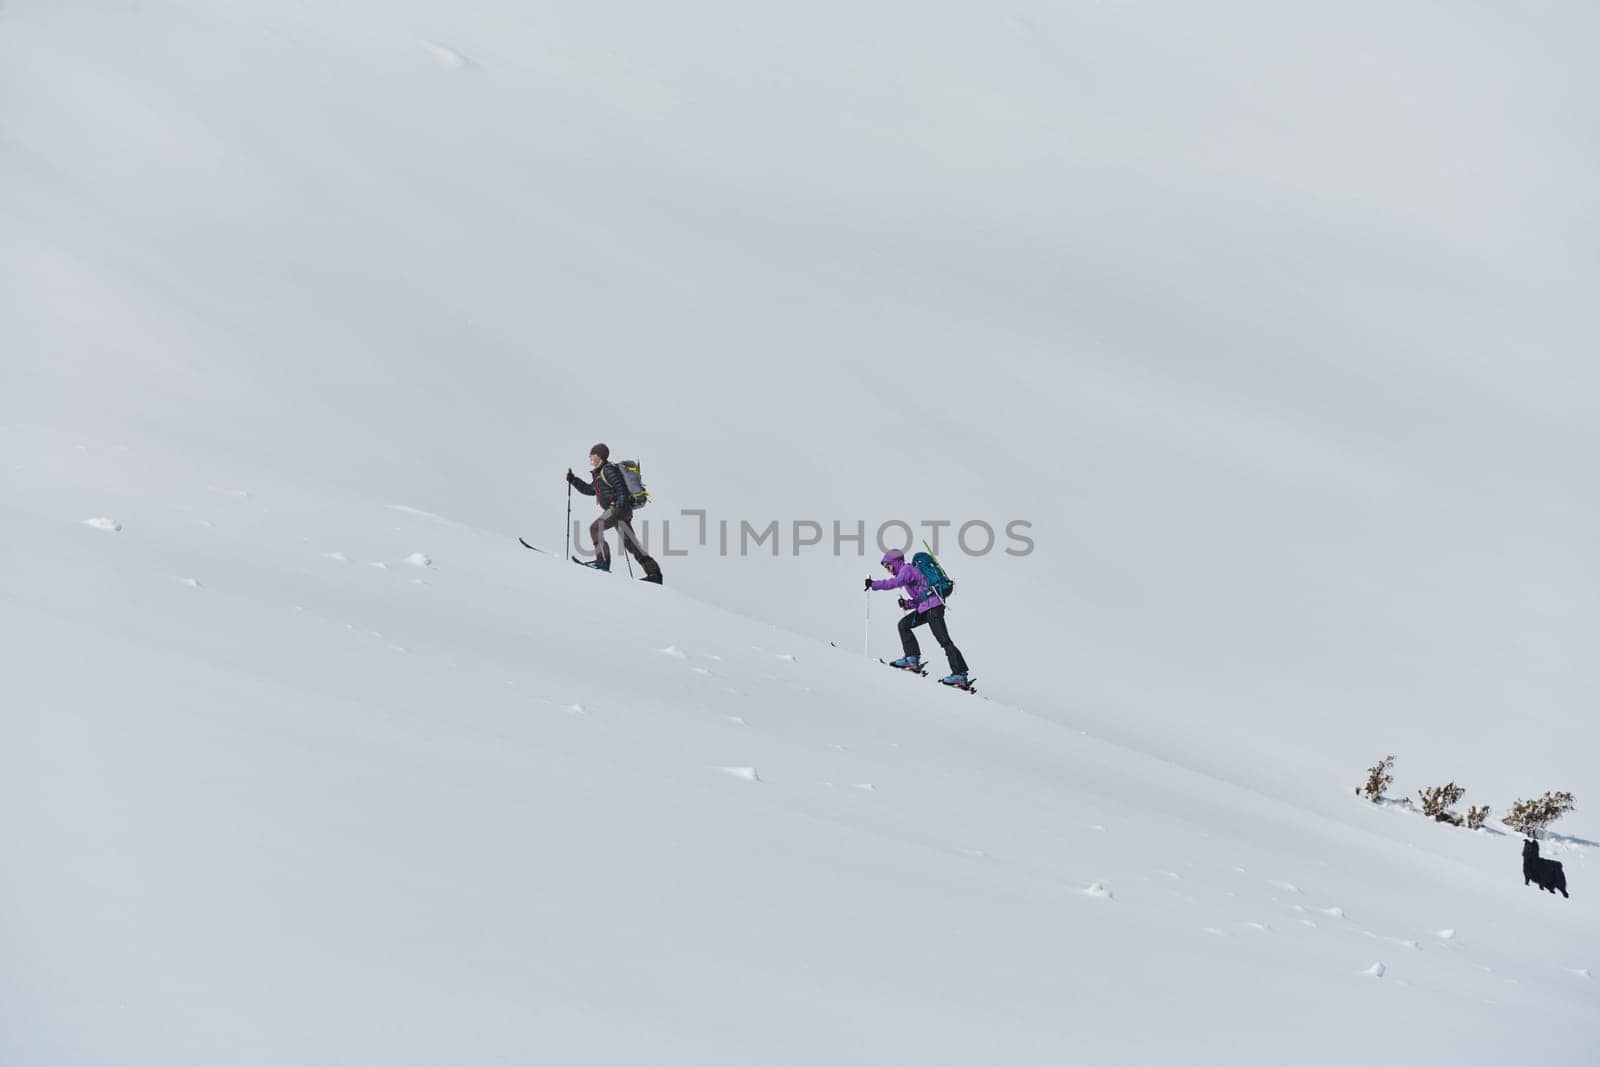 Alpine Ascent: Two Professional Skiers Conquer Snowy Peaks as a Determined Team. by dotshock